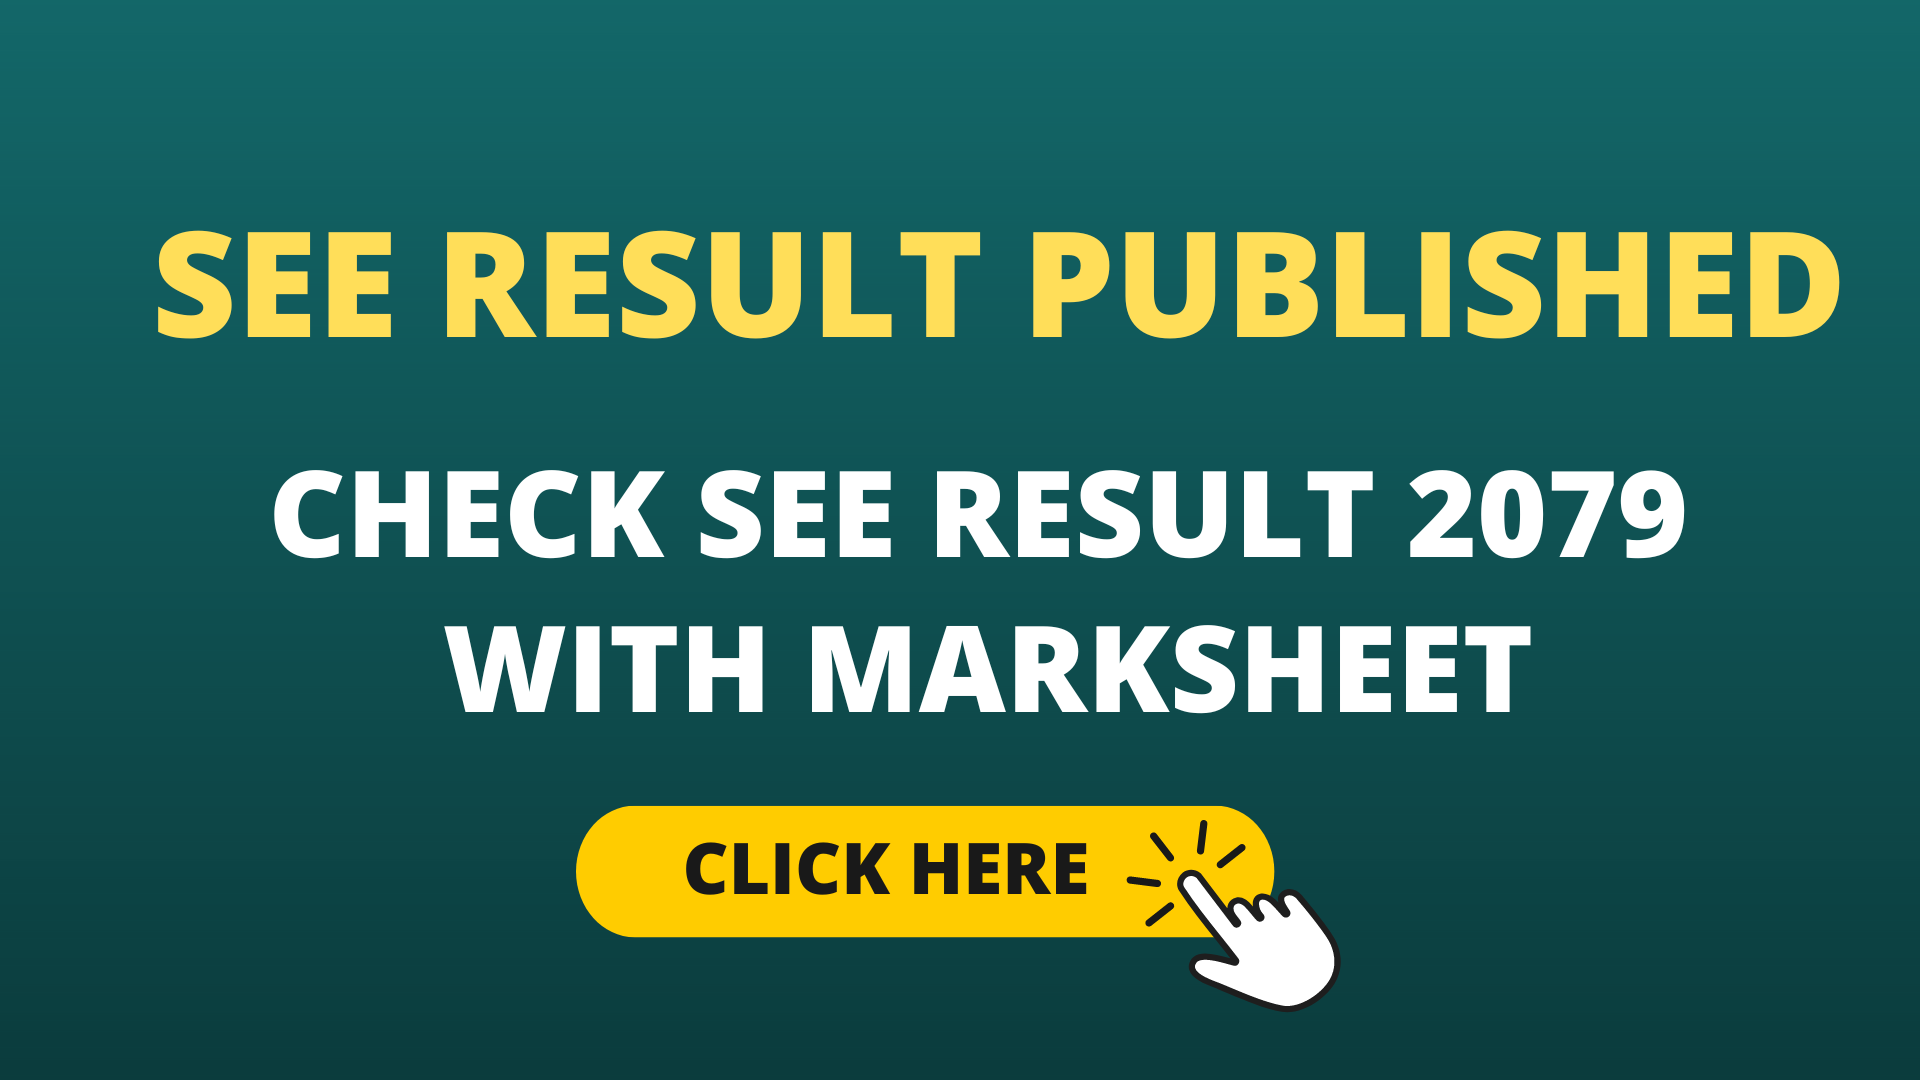 CHECK SEE RESULTS 2079 | WITH MARKSHEET - Your All Notes